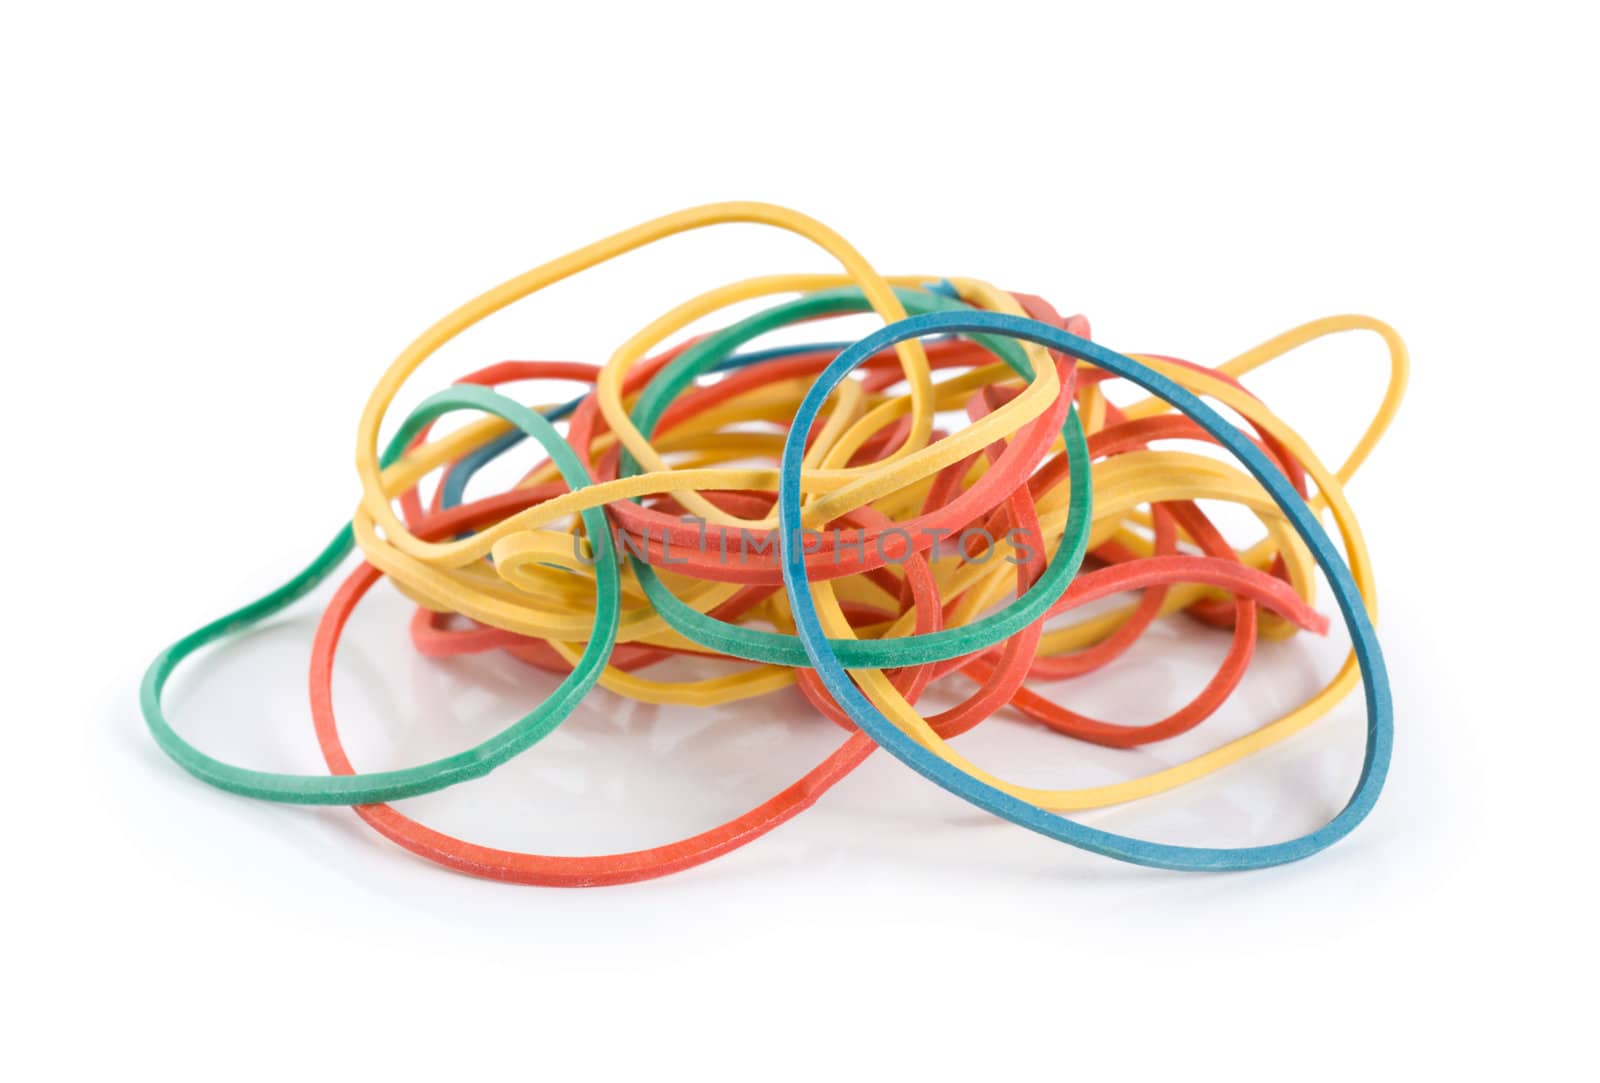 Elastic bands by Givaga